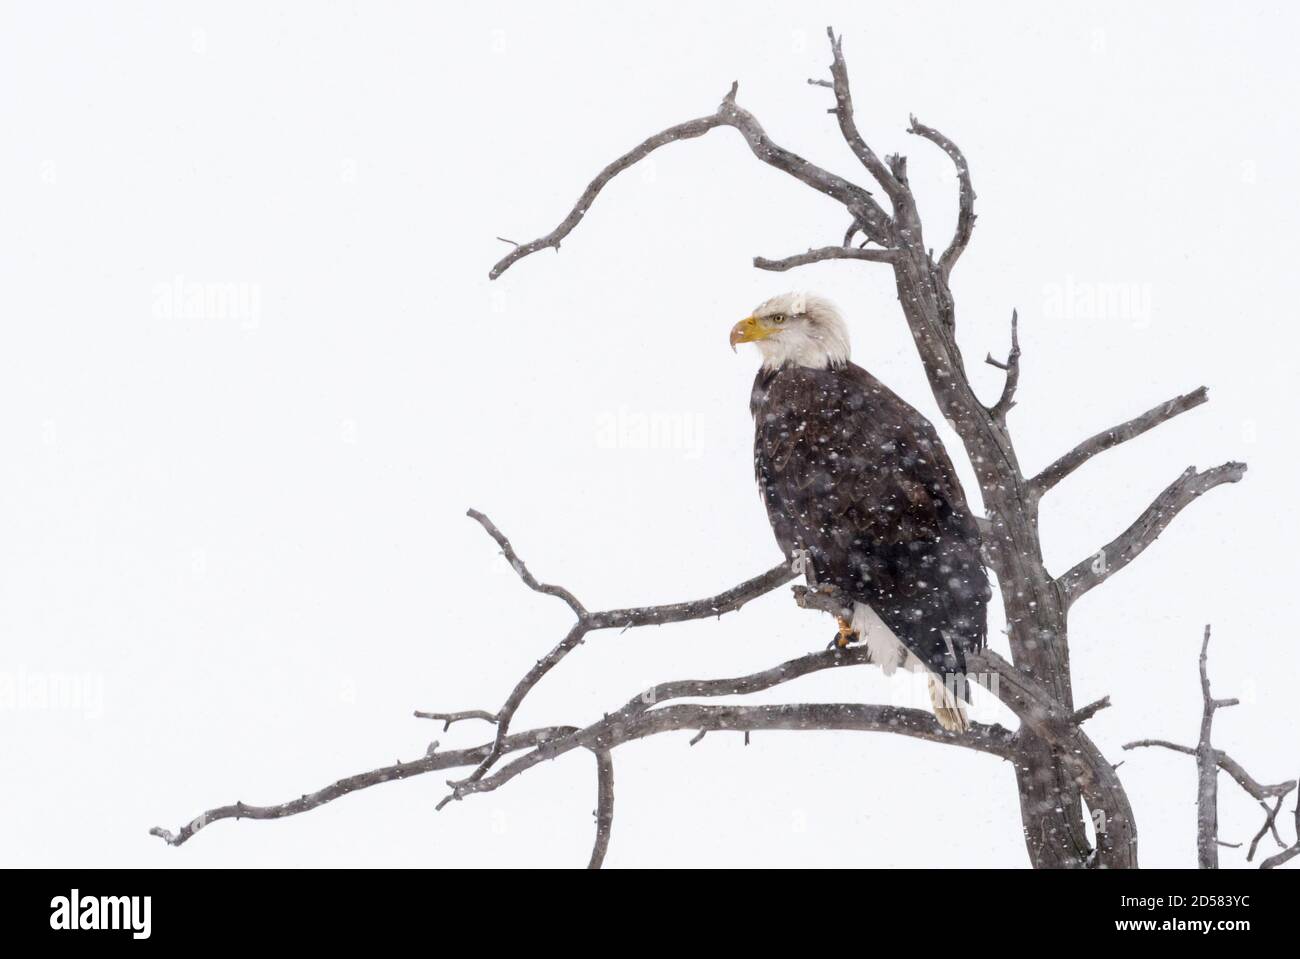 Bald Eagle (Haliaeetus leucocephalus) perched in dead tree during snow fall in winter, Yellowstone national park, Wyoming, Montana, United states of A Stock Photo